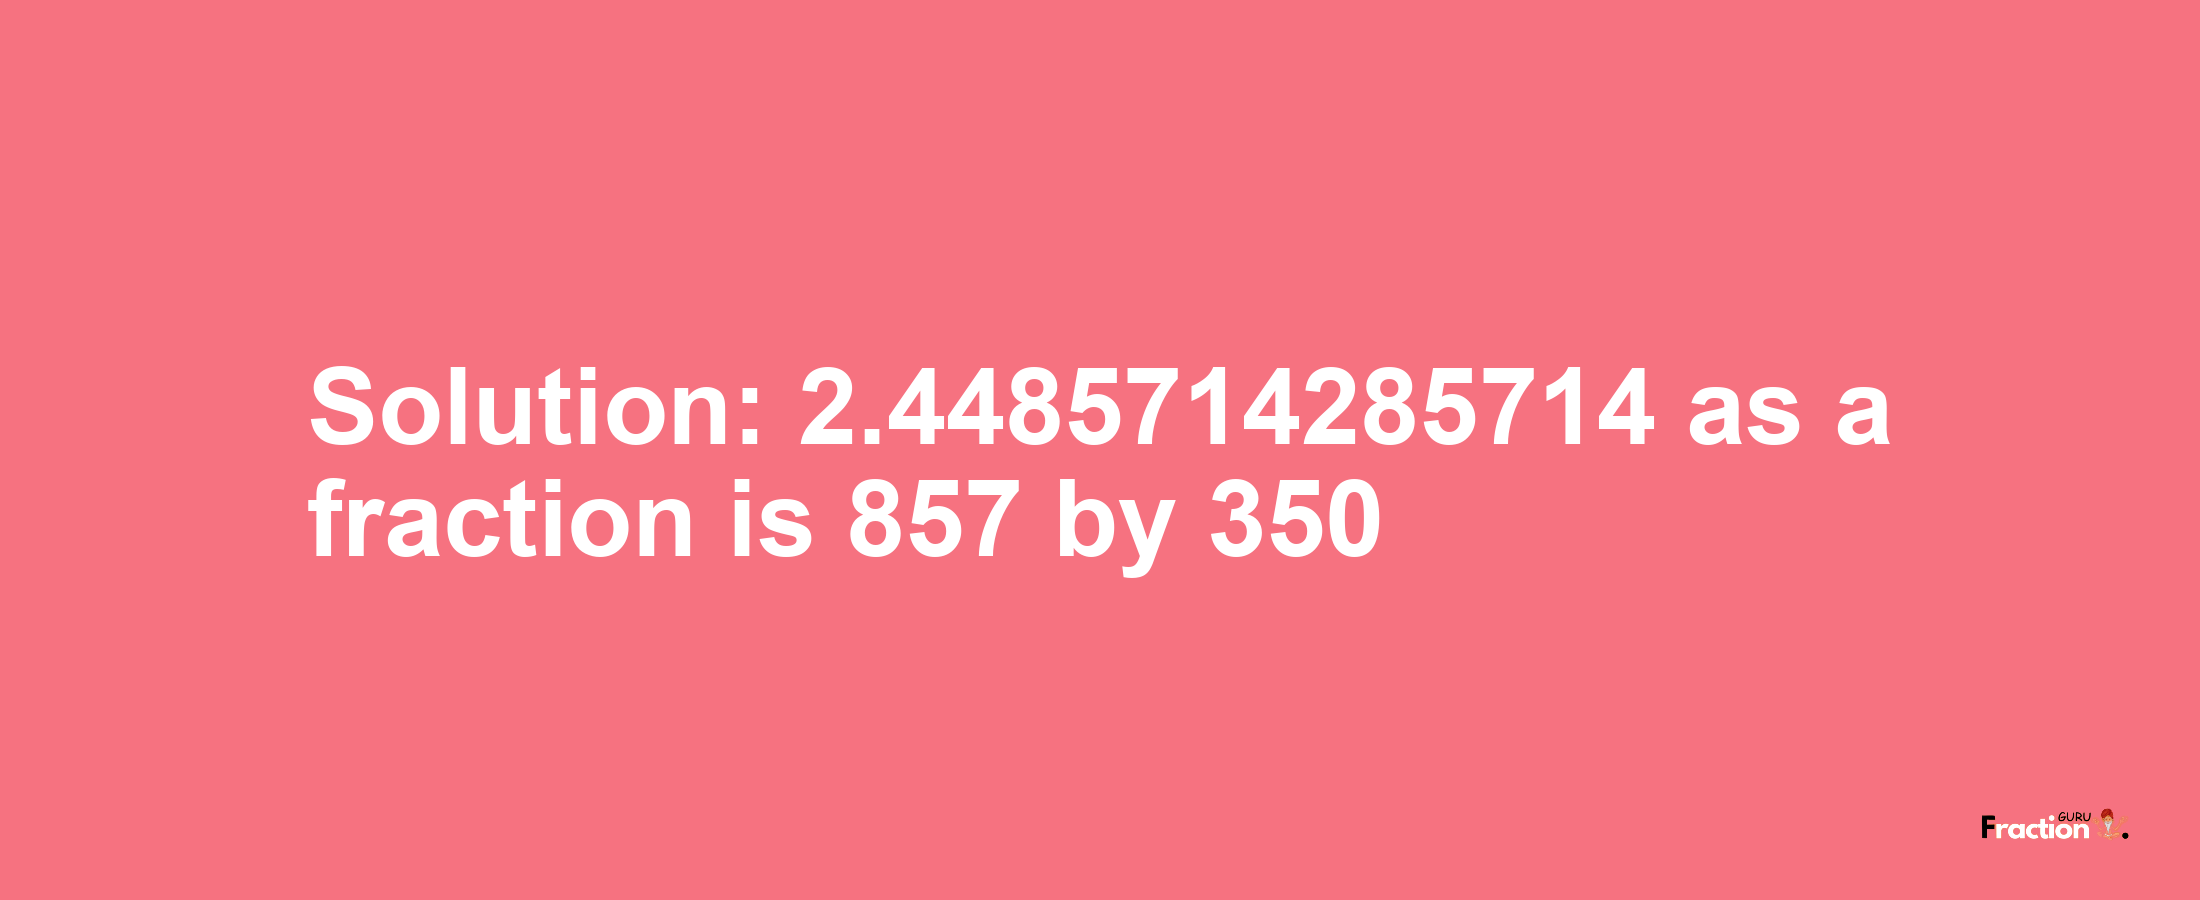 Solution:2.4485714285714 as a fraction is 857/350